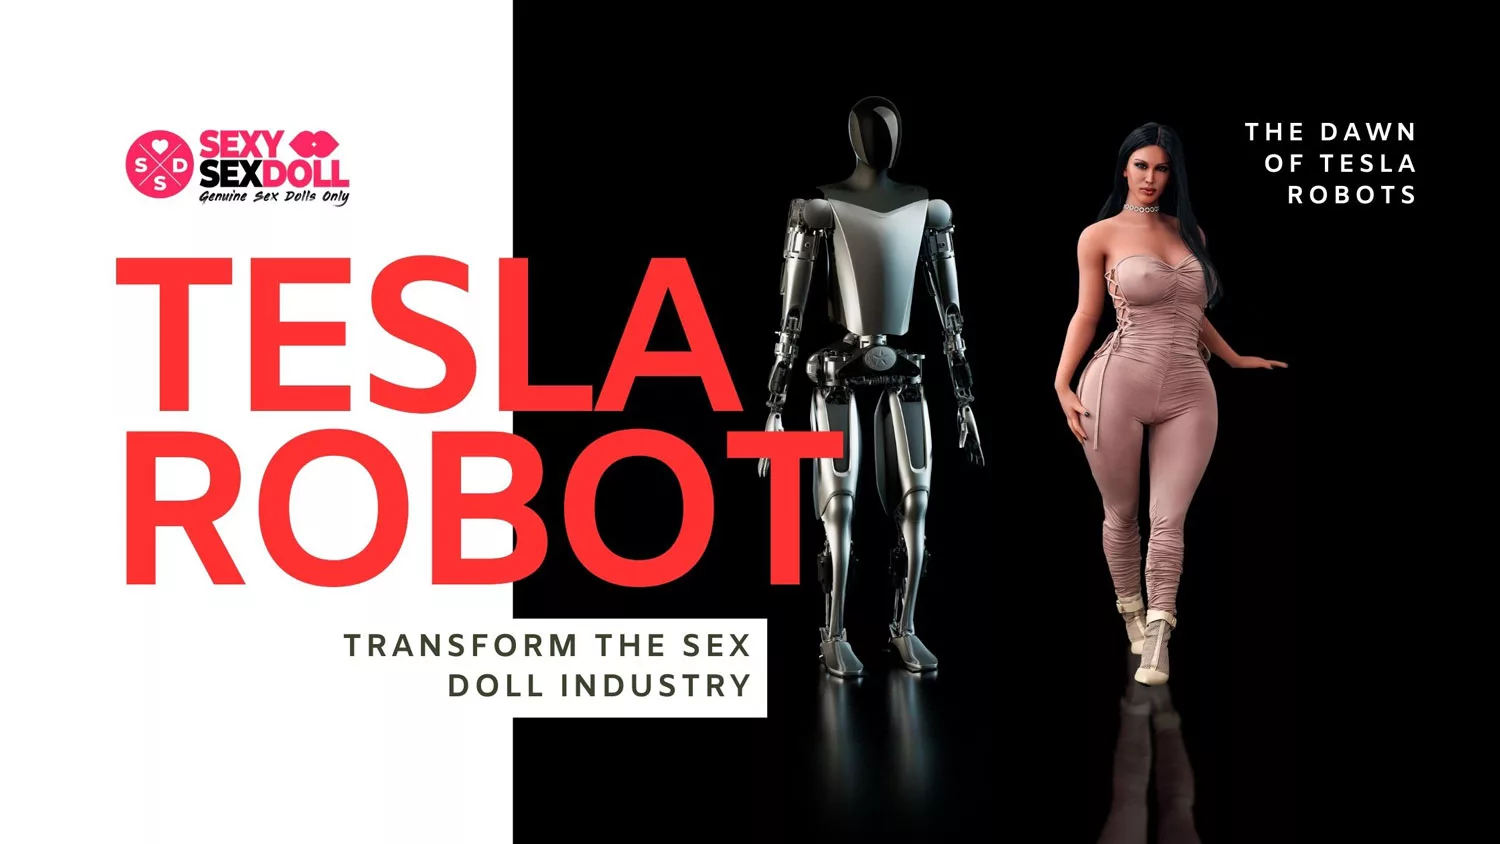 How Tesla Robots Will Integrate Into Our Daily Lives and Transform the Sex Doll Industry